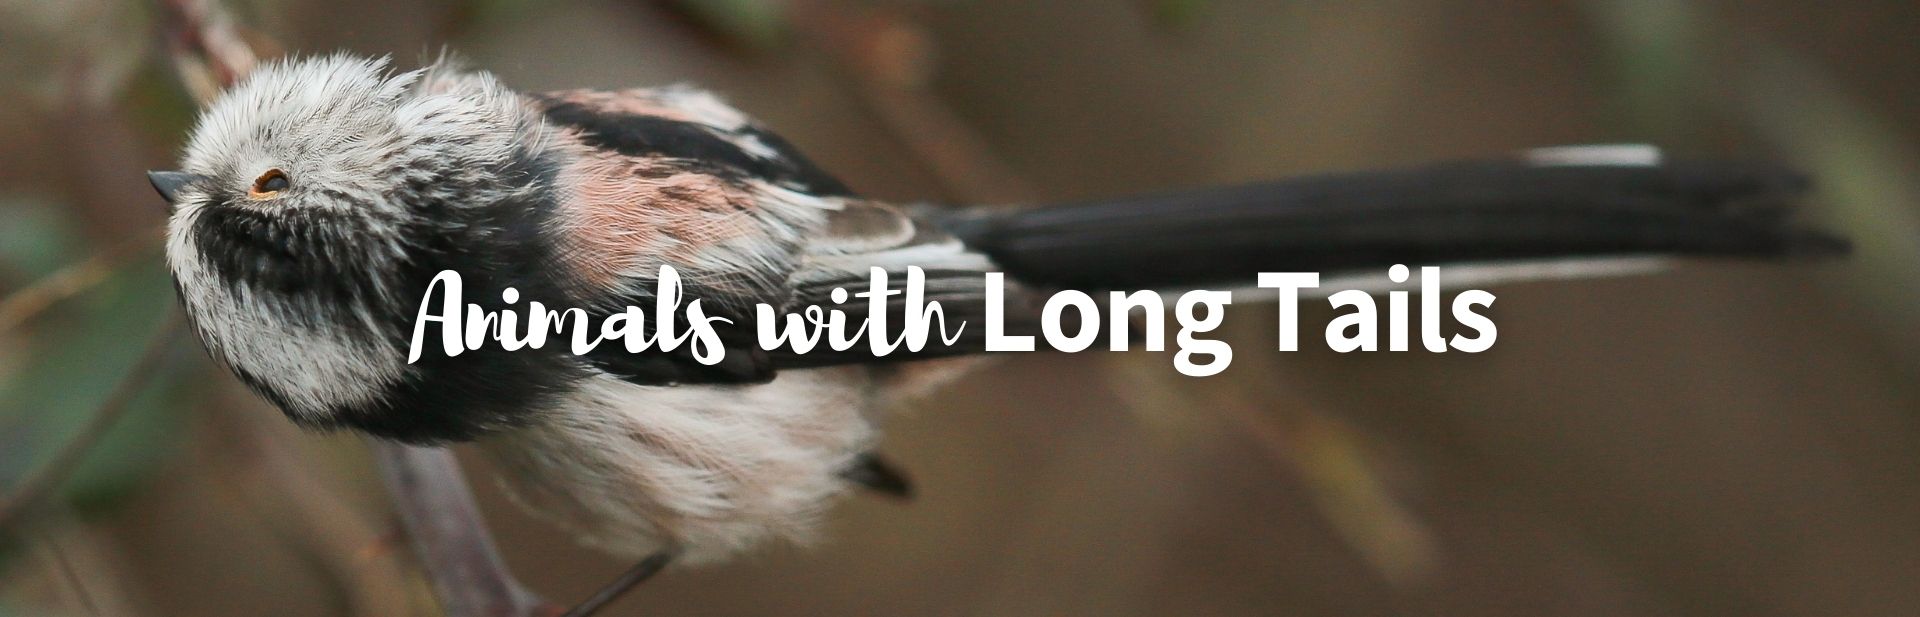 Top 21 Animals With Long Tails Across the World